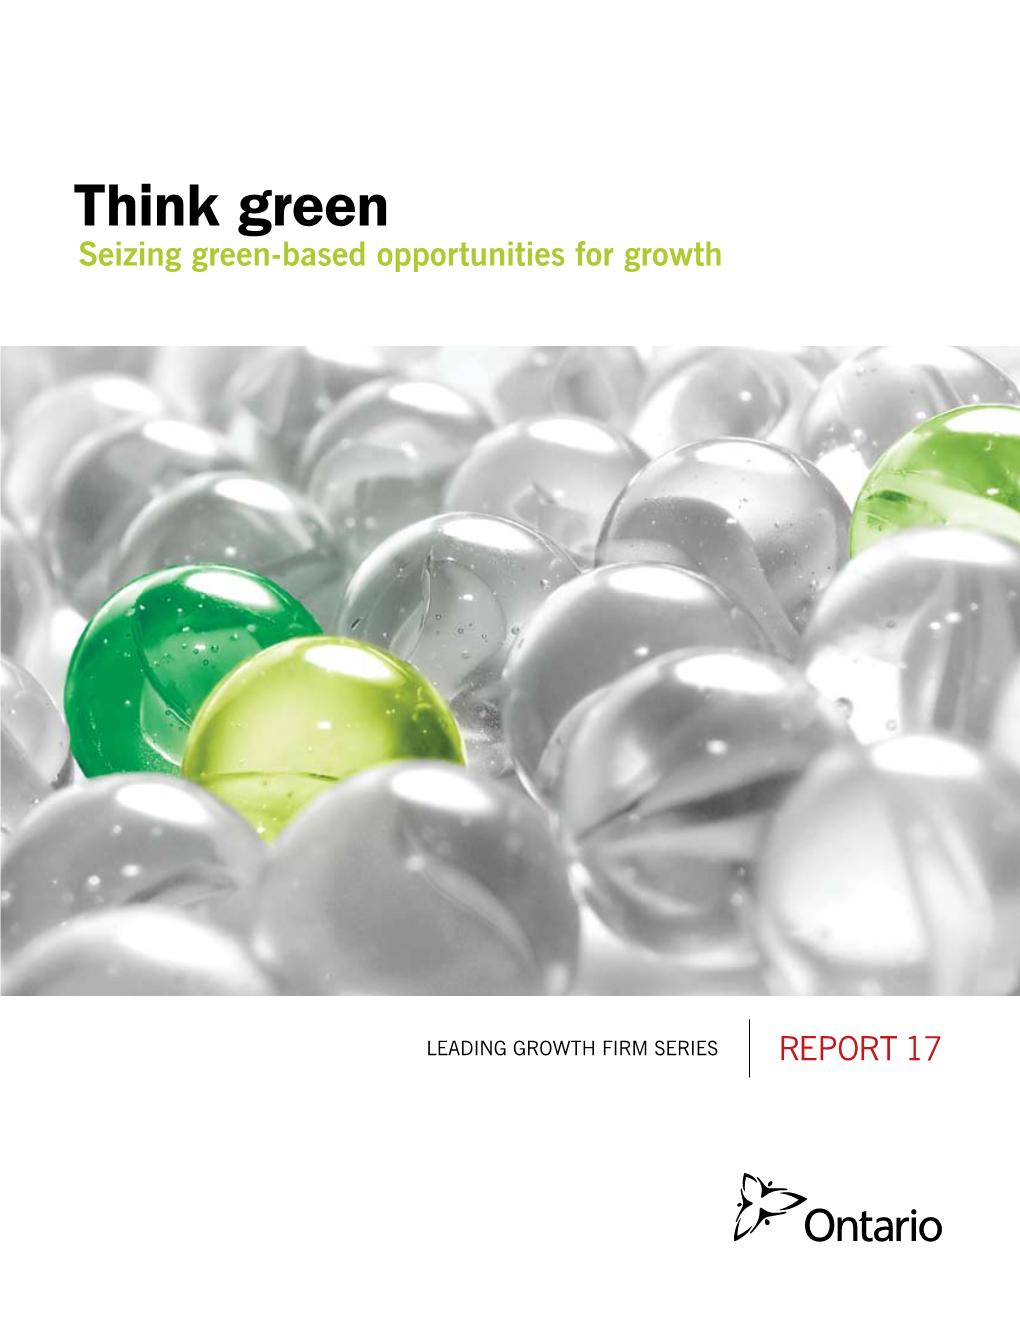 Think Green Seizing Green-Based Opportunities for Growth